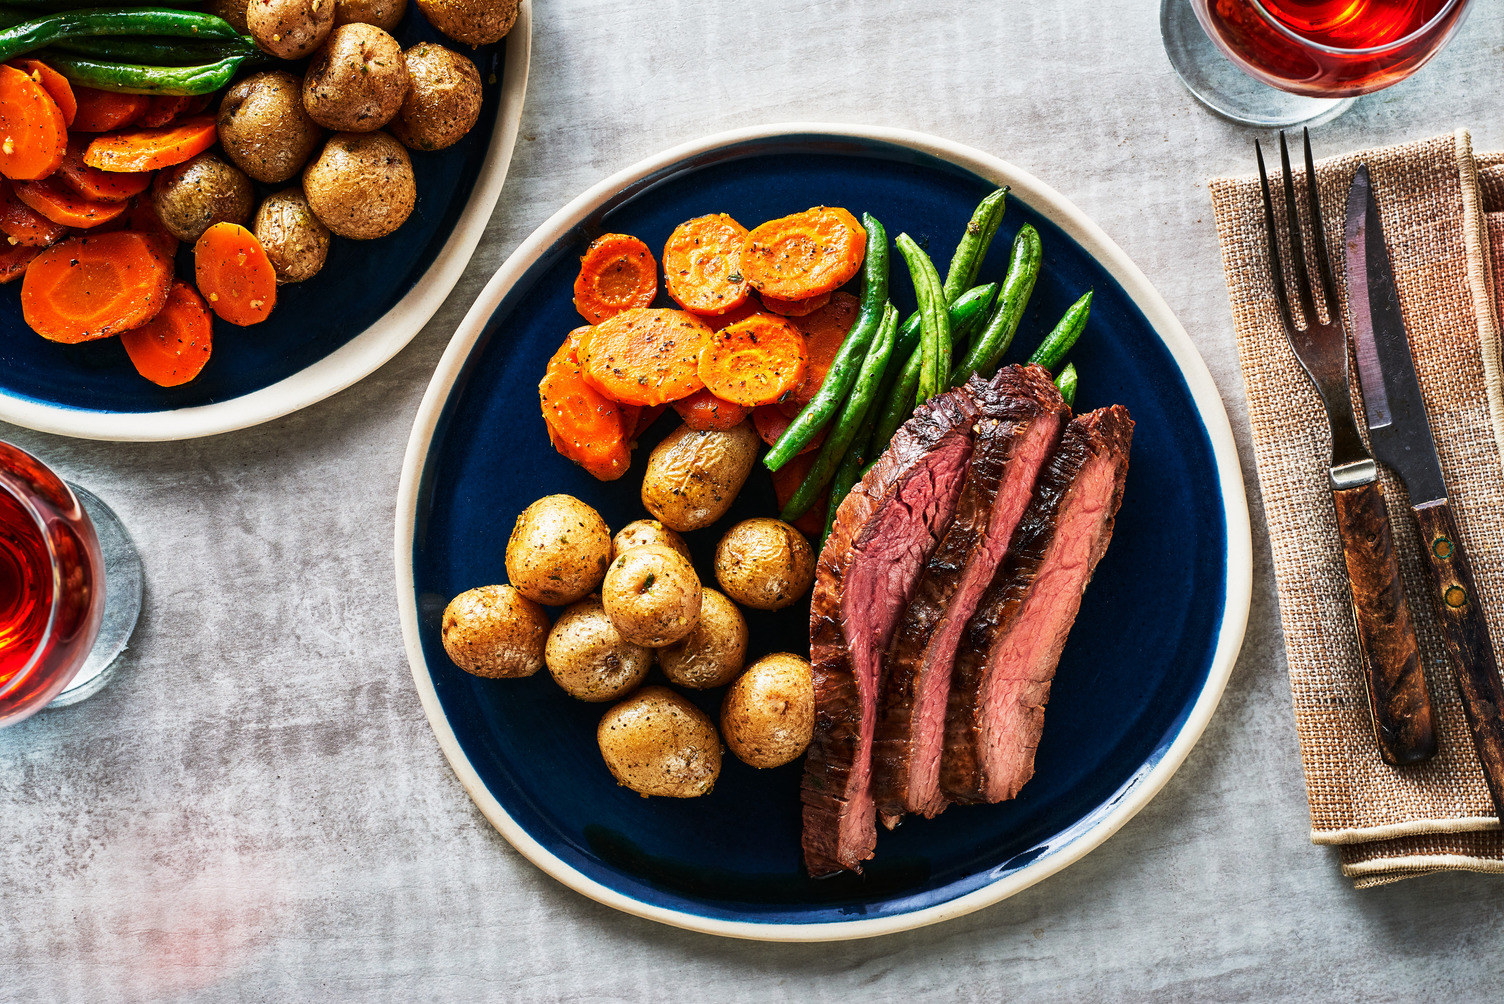 A plate with carved flank steak, green beans, roasted little potatoes, and sliced carrots.